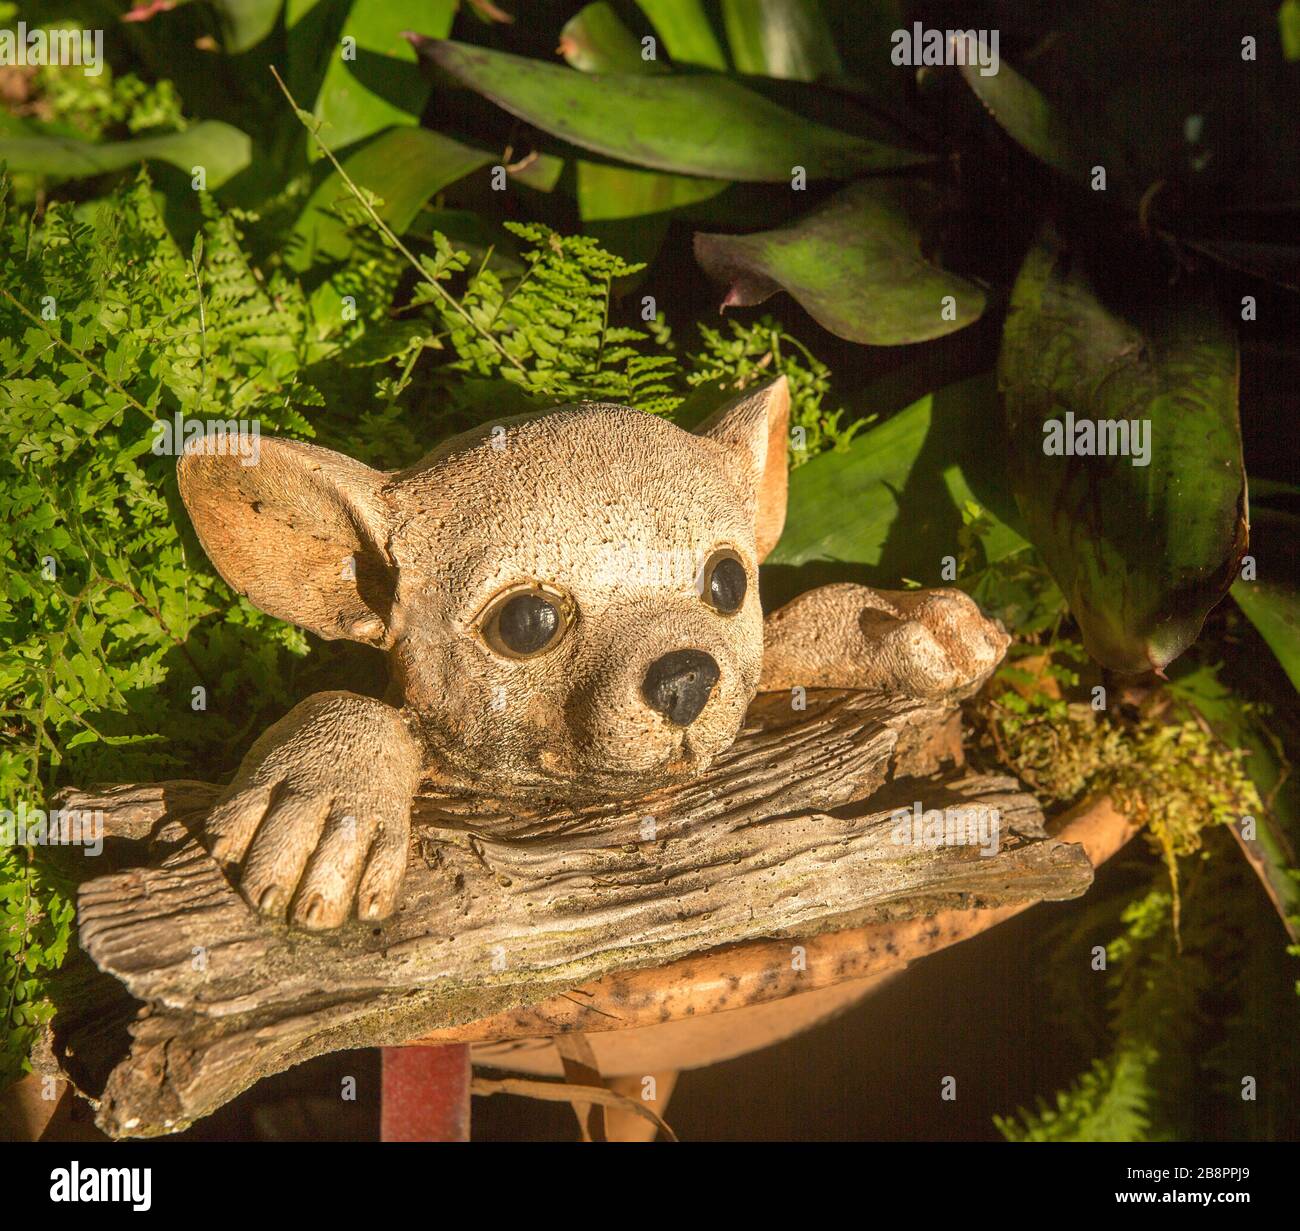 Garden ornament of dog with  paws on weathered log and appealing face and large eyes peering from emerald foliage of ferns Stock Photo